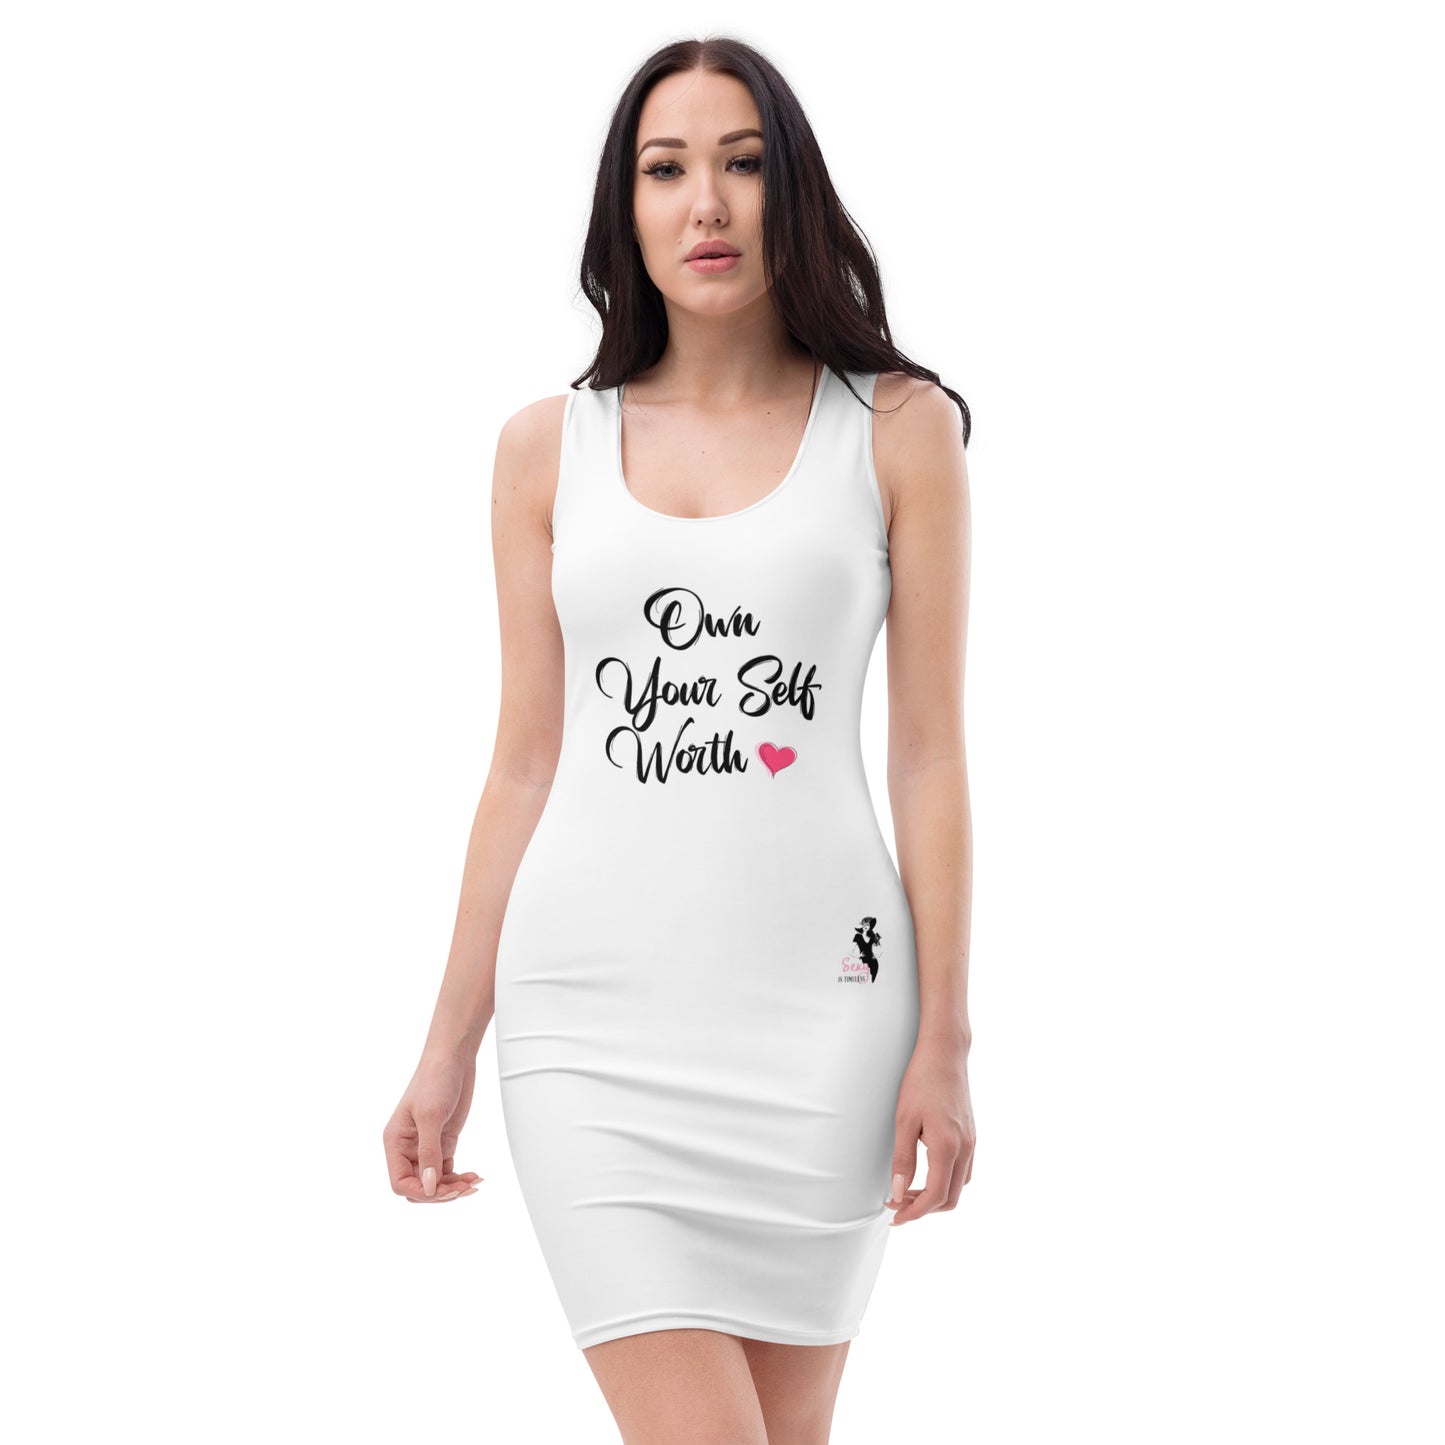 Dress - Own your self worth